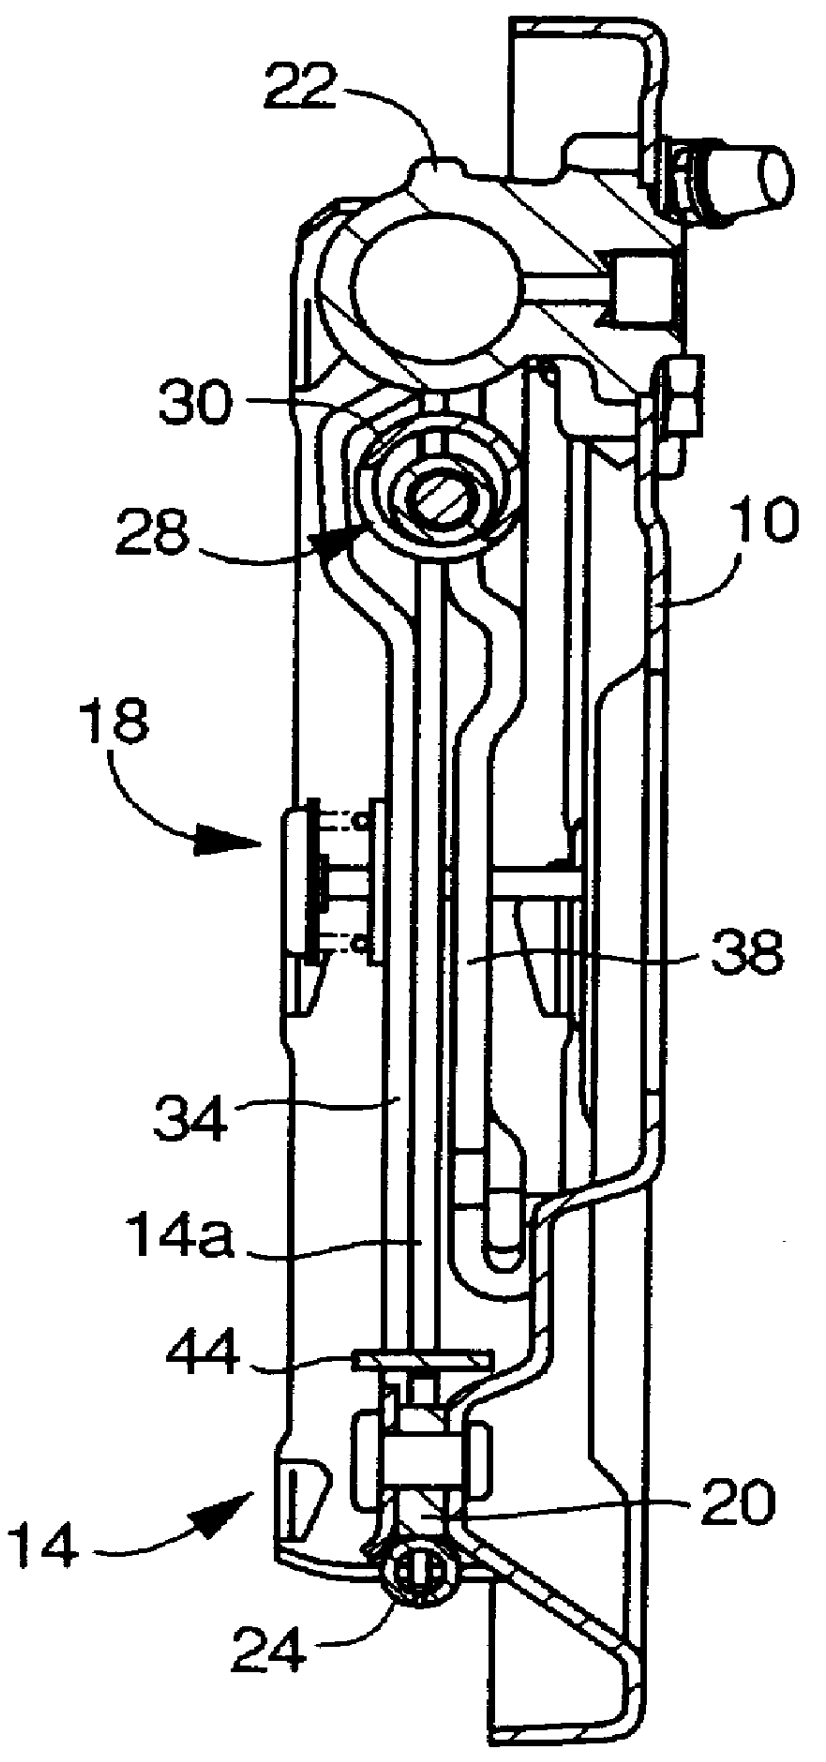 Dual-mode drum brake having parking lever pivotable about an axis perpendicular to backing plate